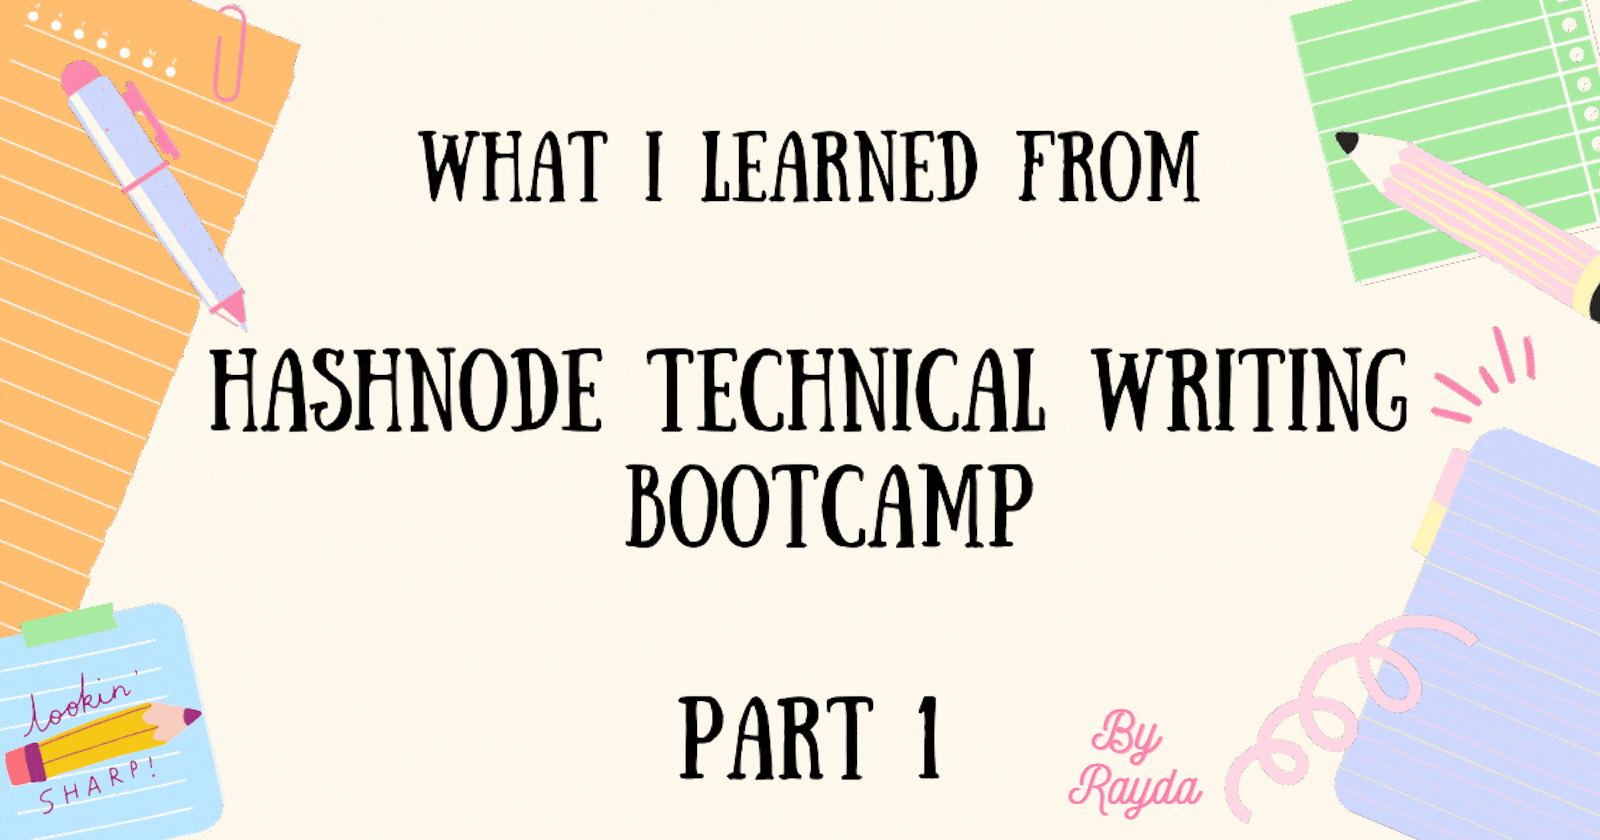 What I learned from Hashnode Technical Writing Bootcamp Part 1